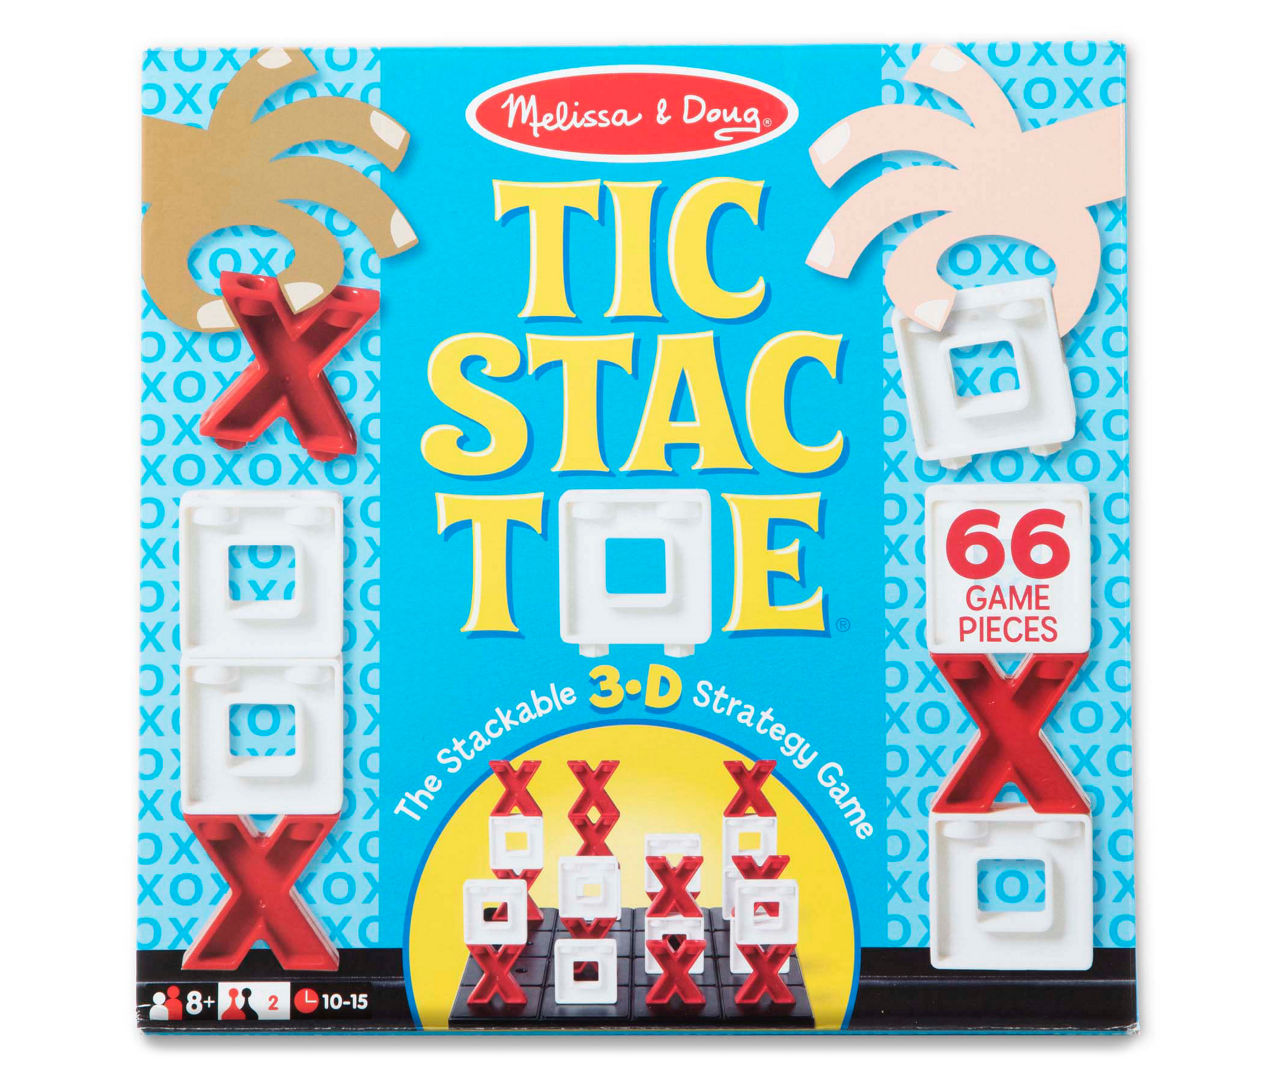 Think Tac Toes - DI Strategy Kit